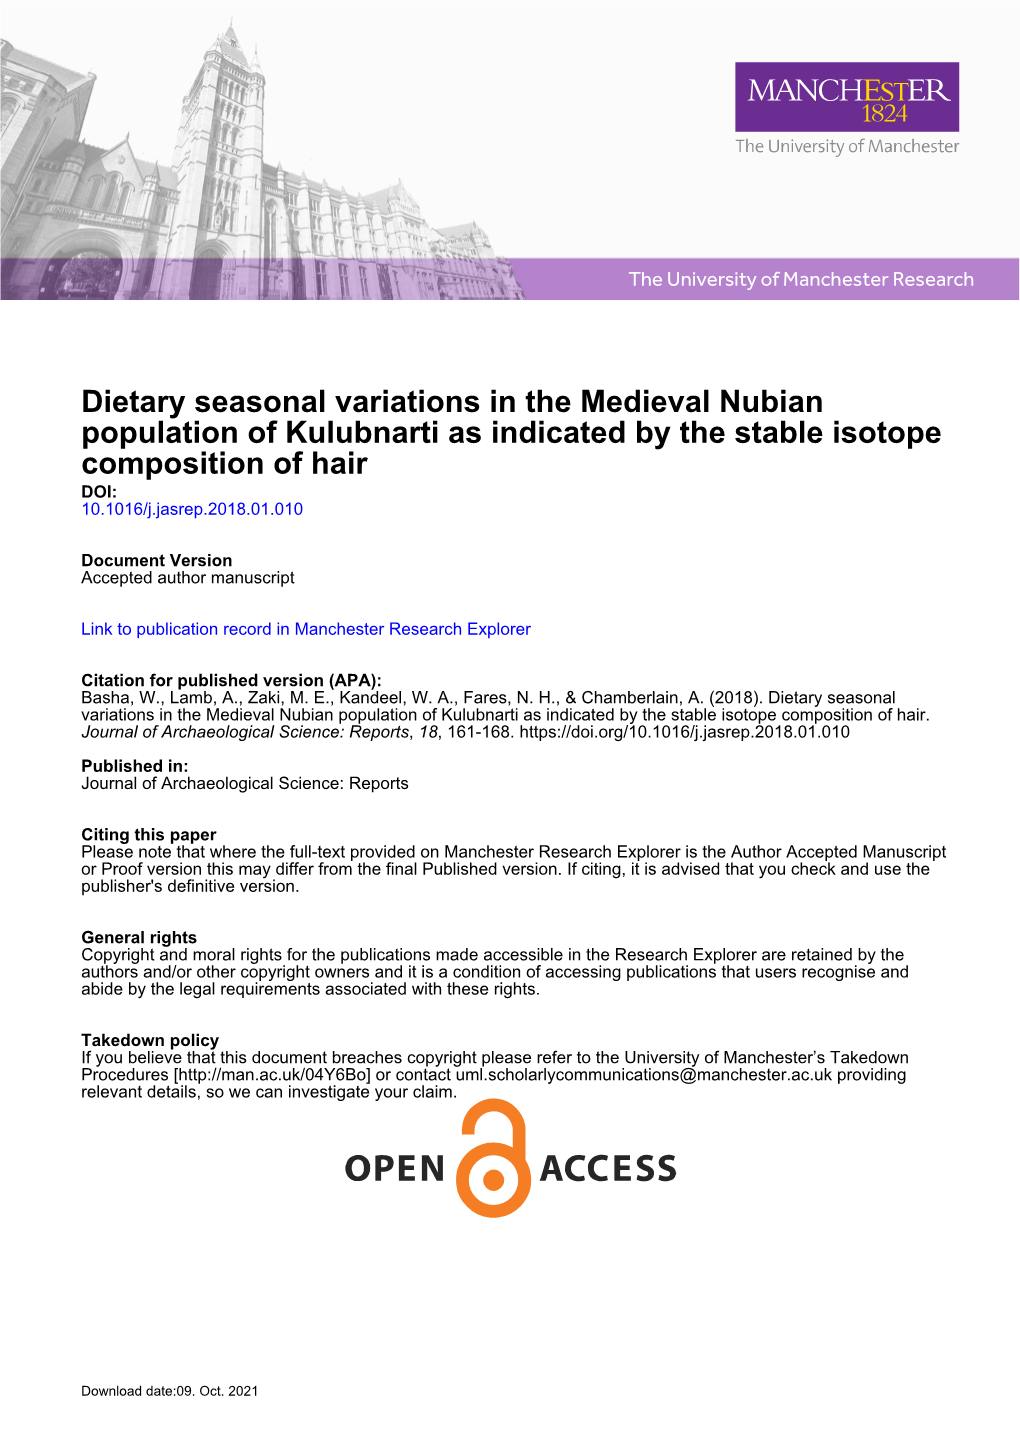 Dietary Seasonal Variations in the Medieval Nubian Population of Kulubnarti As Indicated by the Stable Isotope Composition of Hair DOI: 10.1016/J.Jasrep.2018.01.010